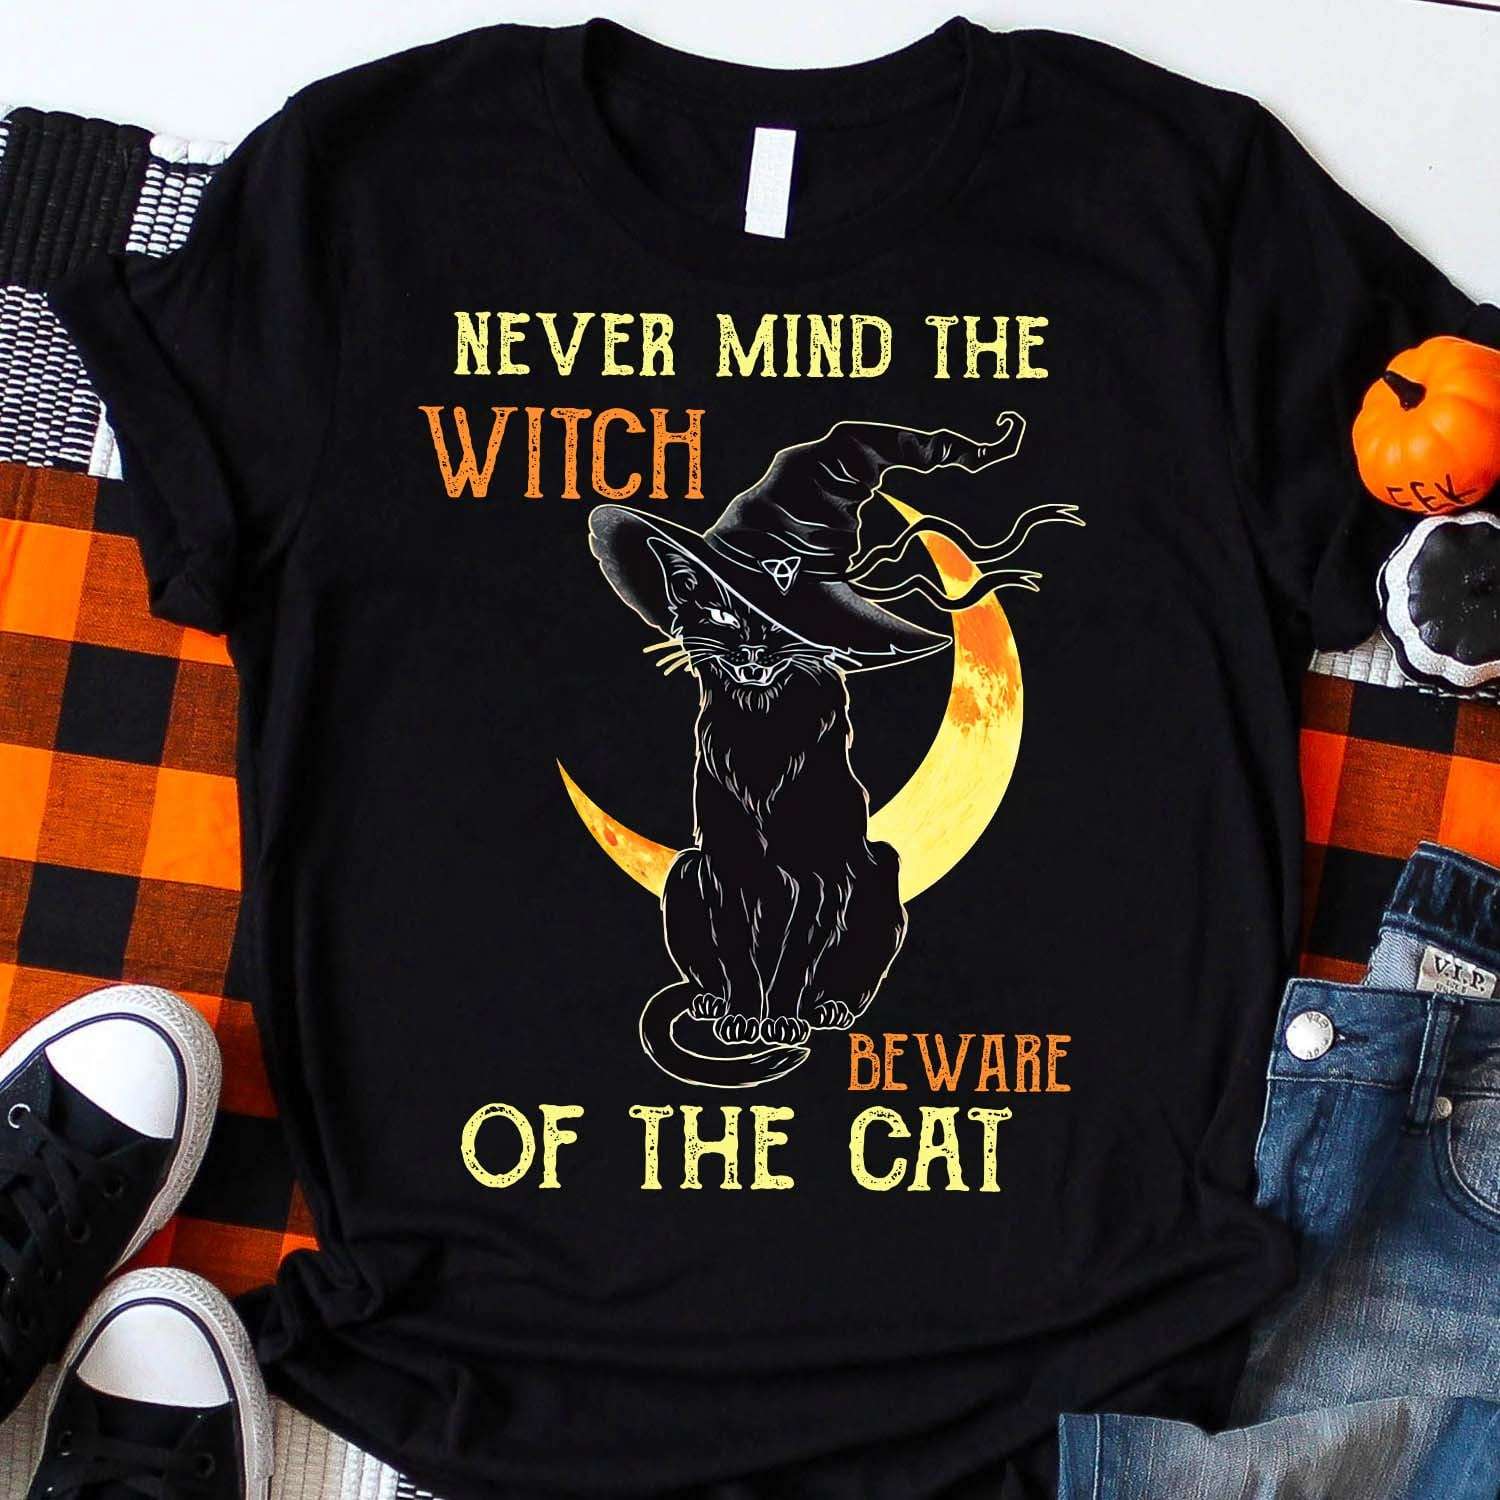 Never mind the witch, beware of the cat - Black cat witch for Halloween